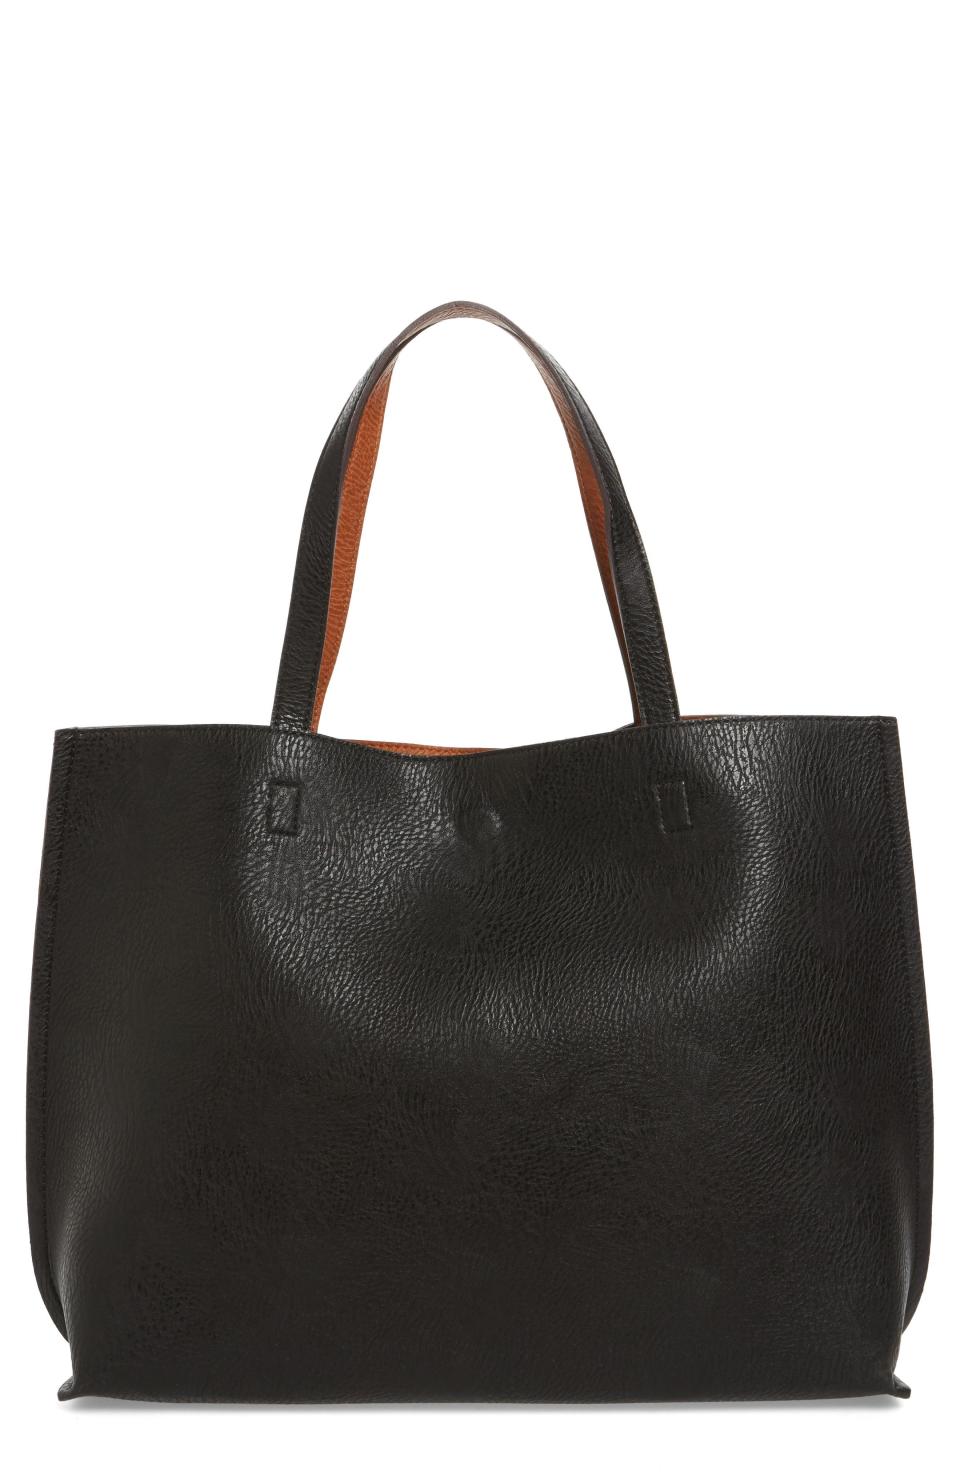 5) Reversible Faux Leather Tote & Wristlet